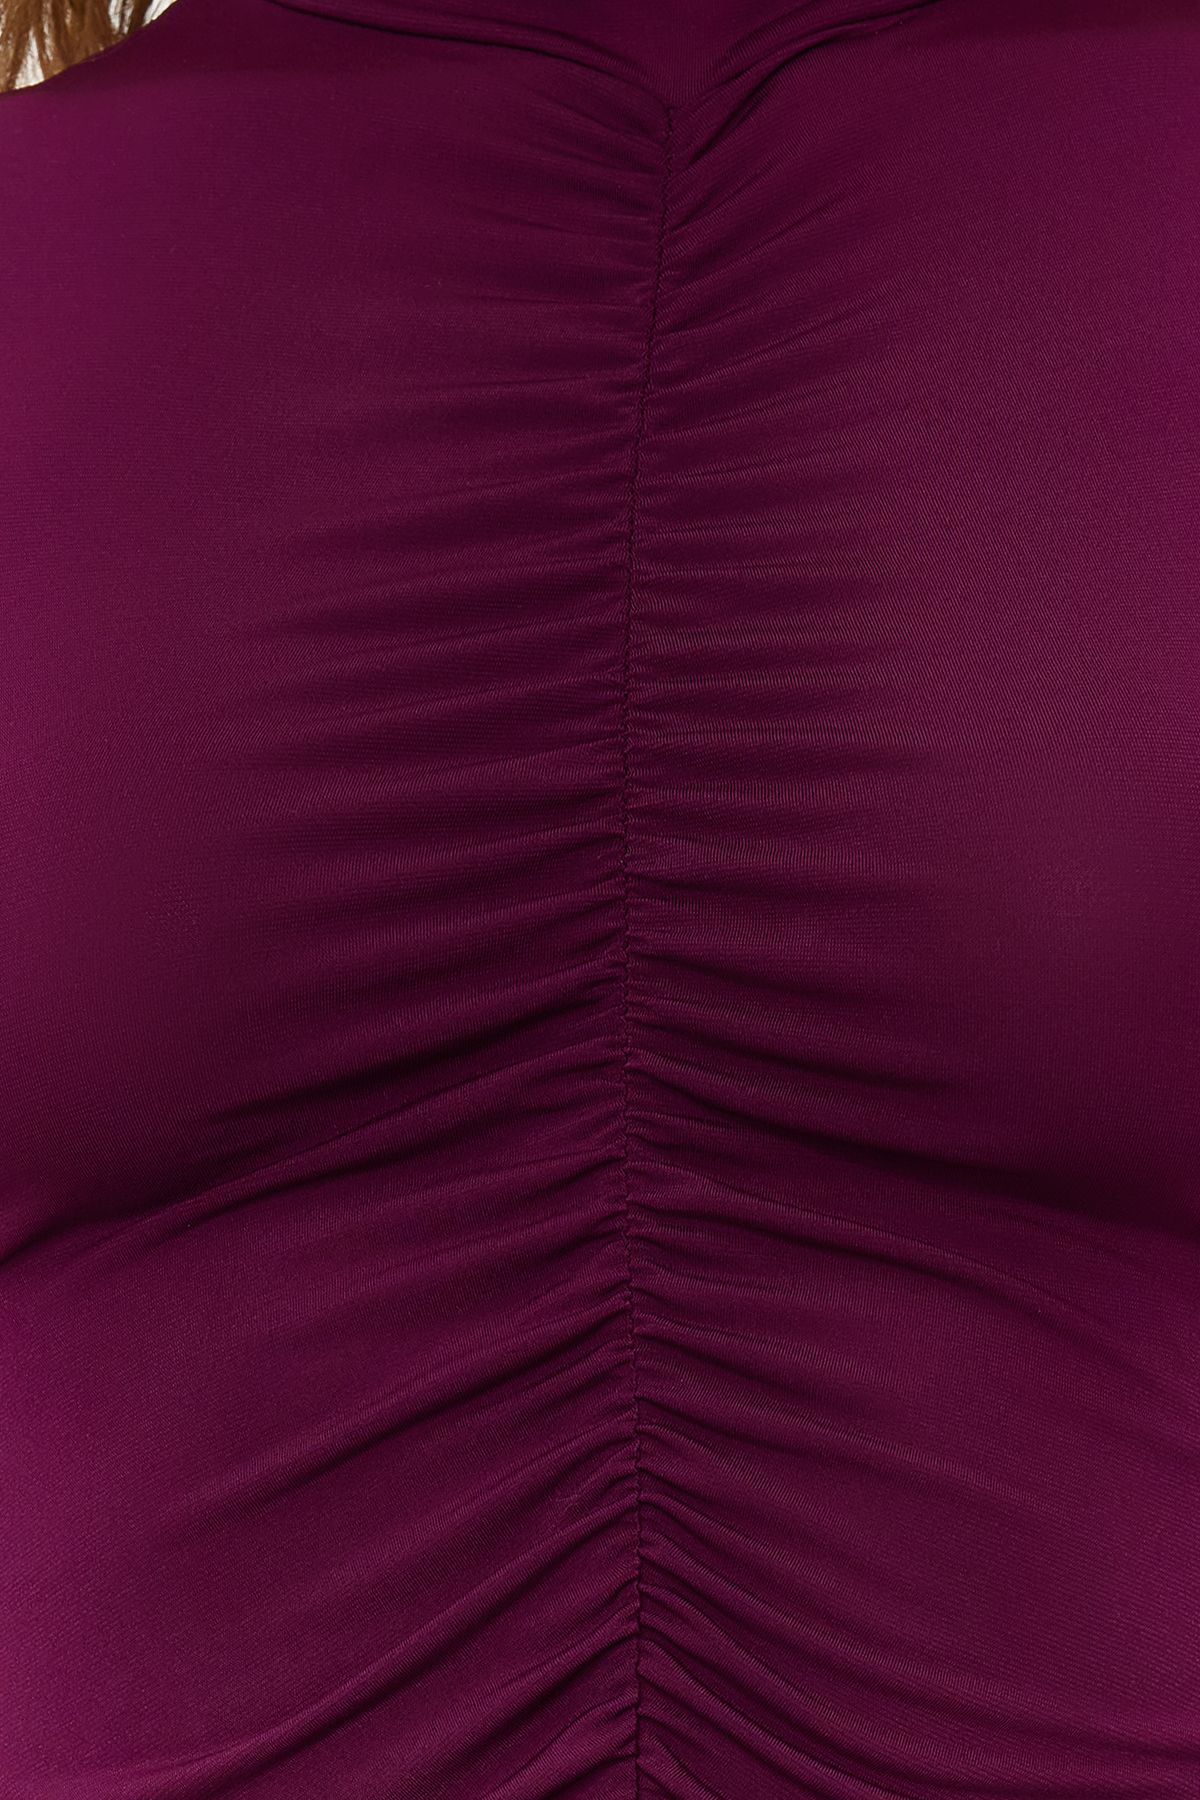 Trendyol Collection Plum Knitted Bodysuit with Pleated Detail and Flexible  Snap Fasteners TWOSS23BD00006 - Trendyol